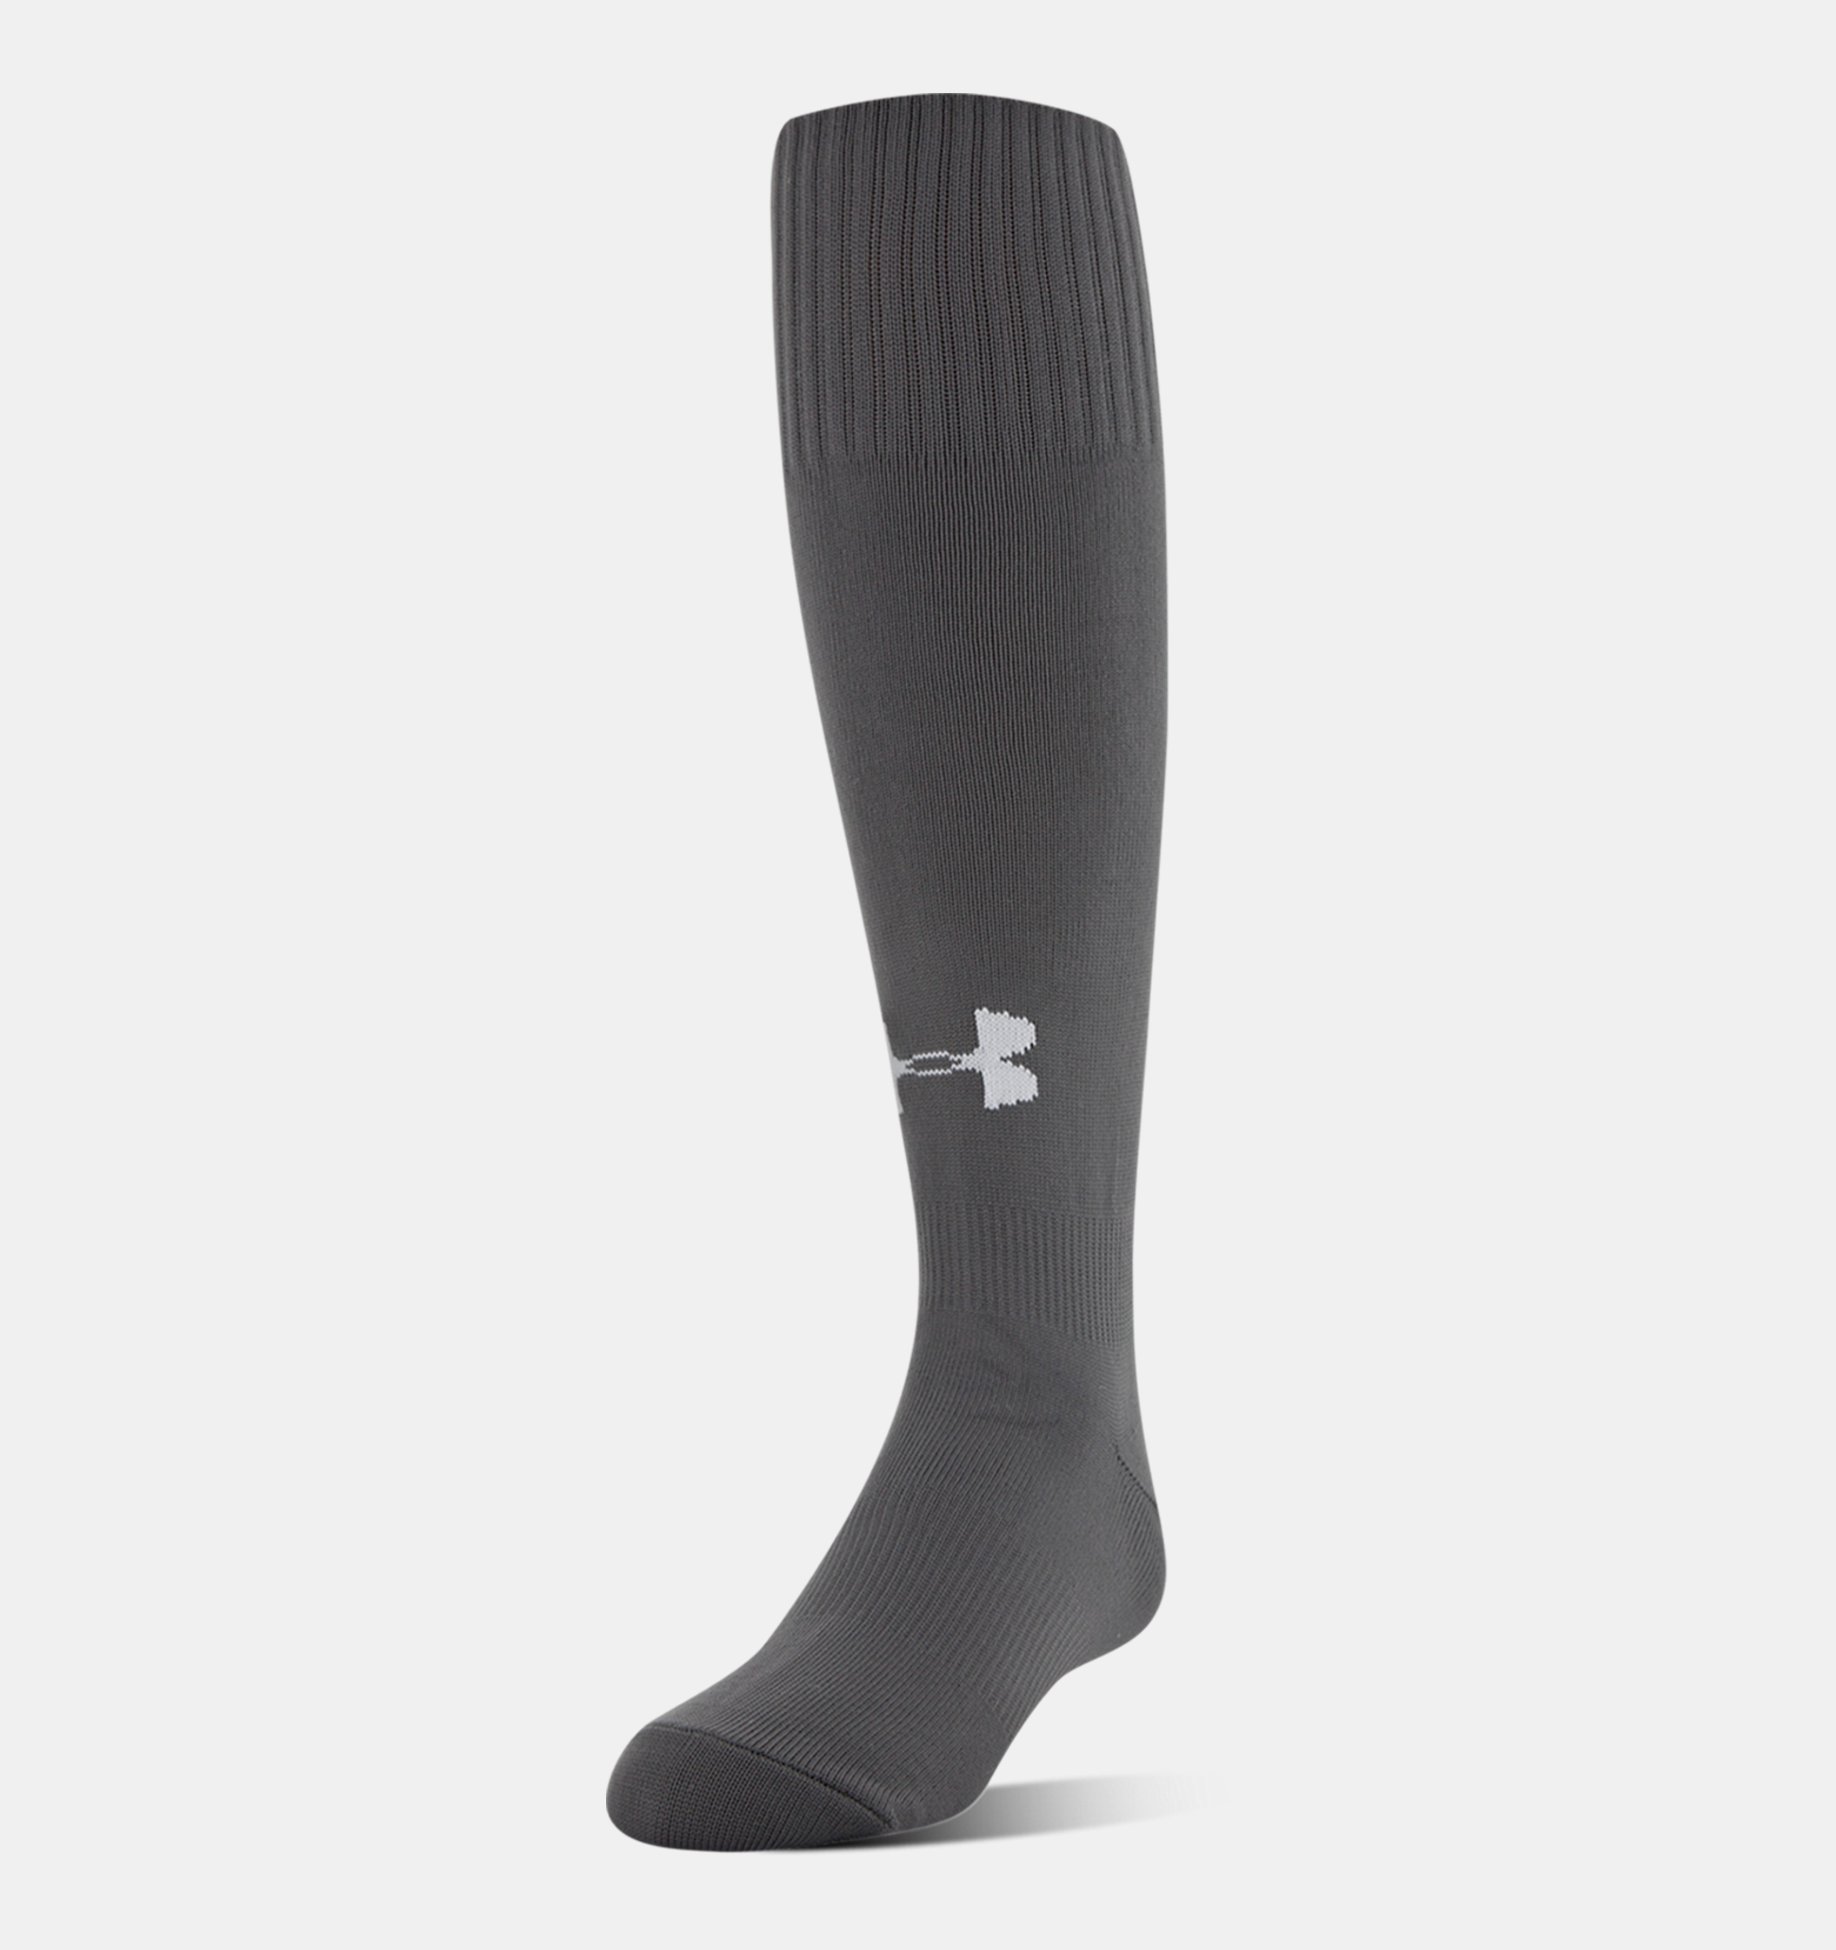 - Large Soccer; Shoe Size 1-4 Youth Girls Under Armour Shinguard Socks Details about   New 